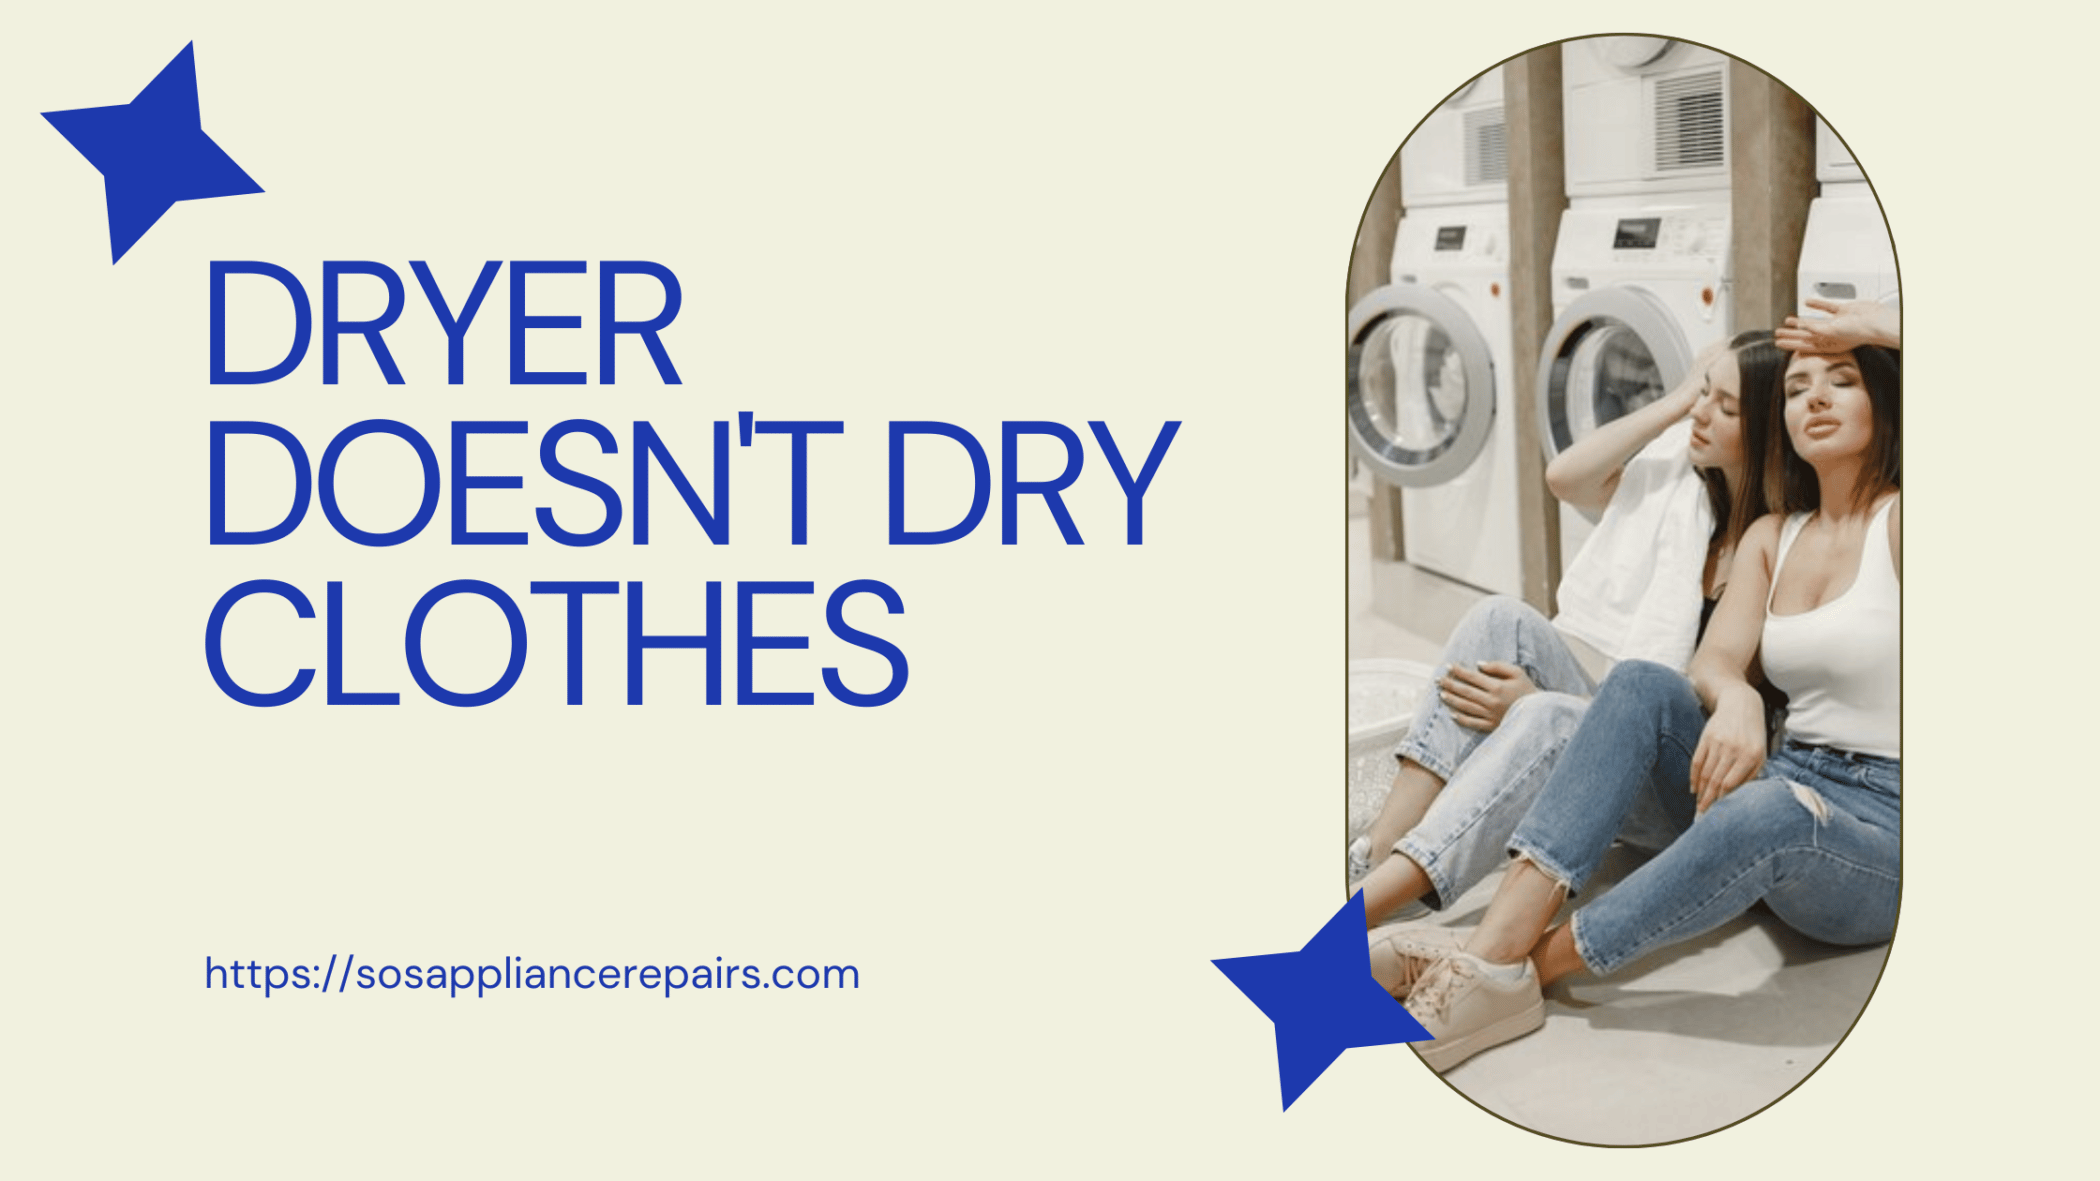 dryer doesn’t dry clothes - sos appliance repairs